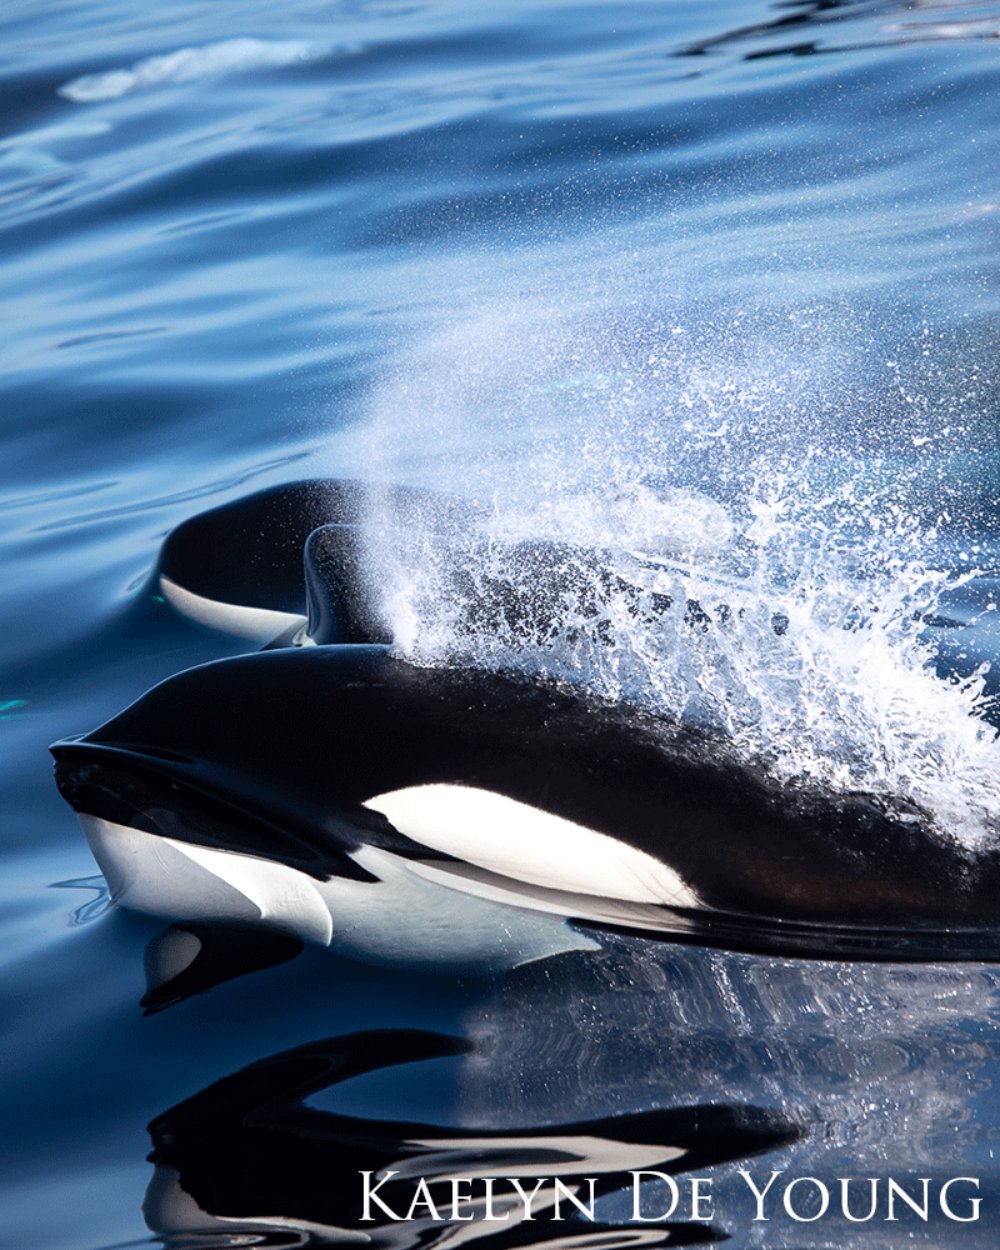 Orca whales swimming above water surface and spurting water from blowhole.